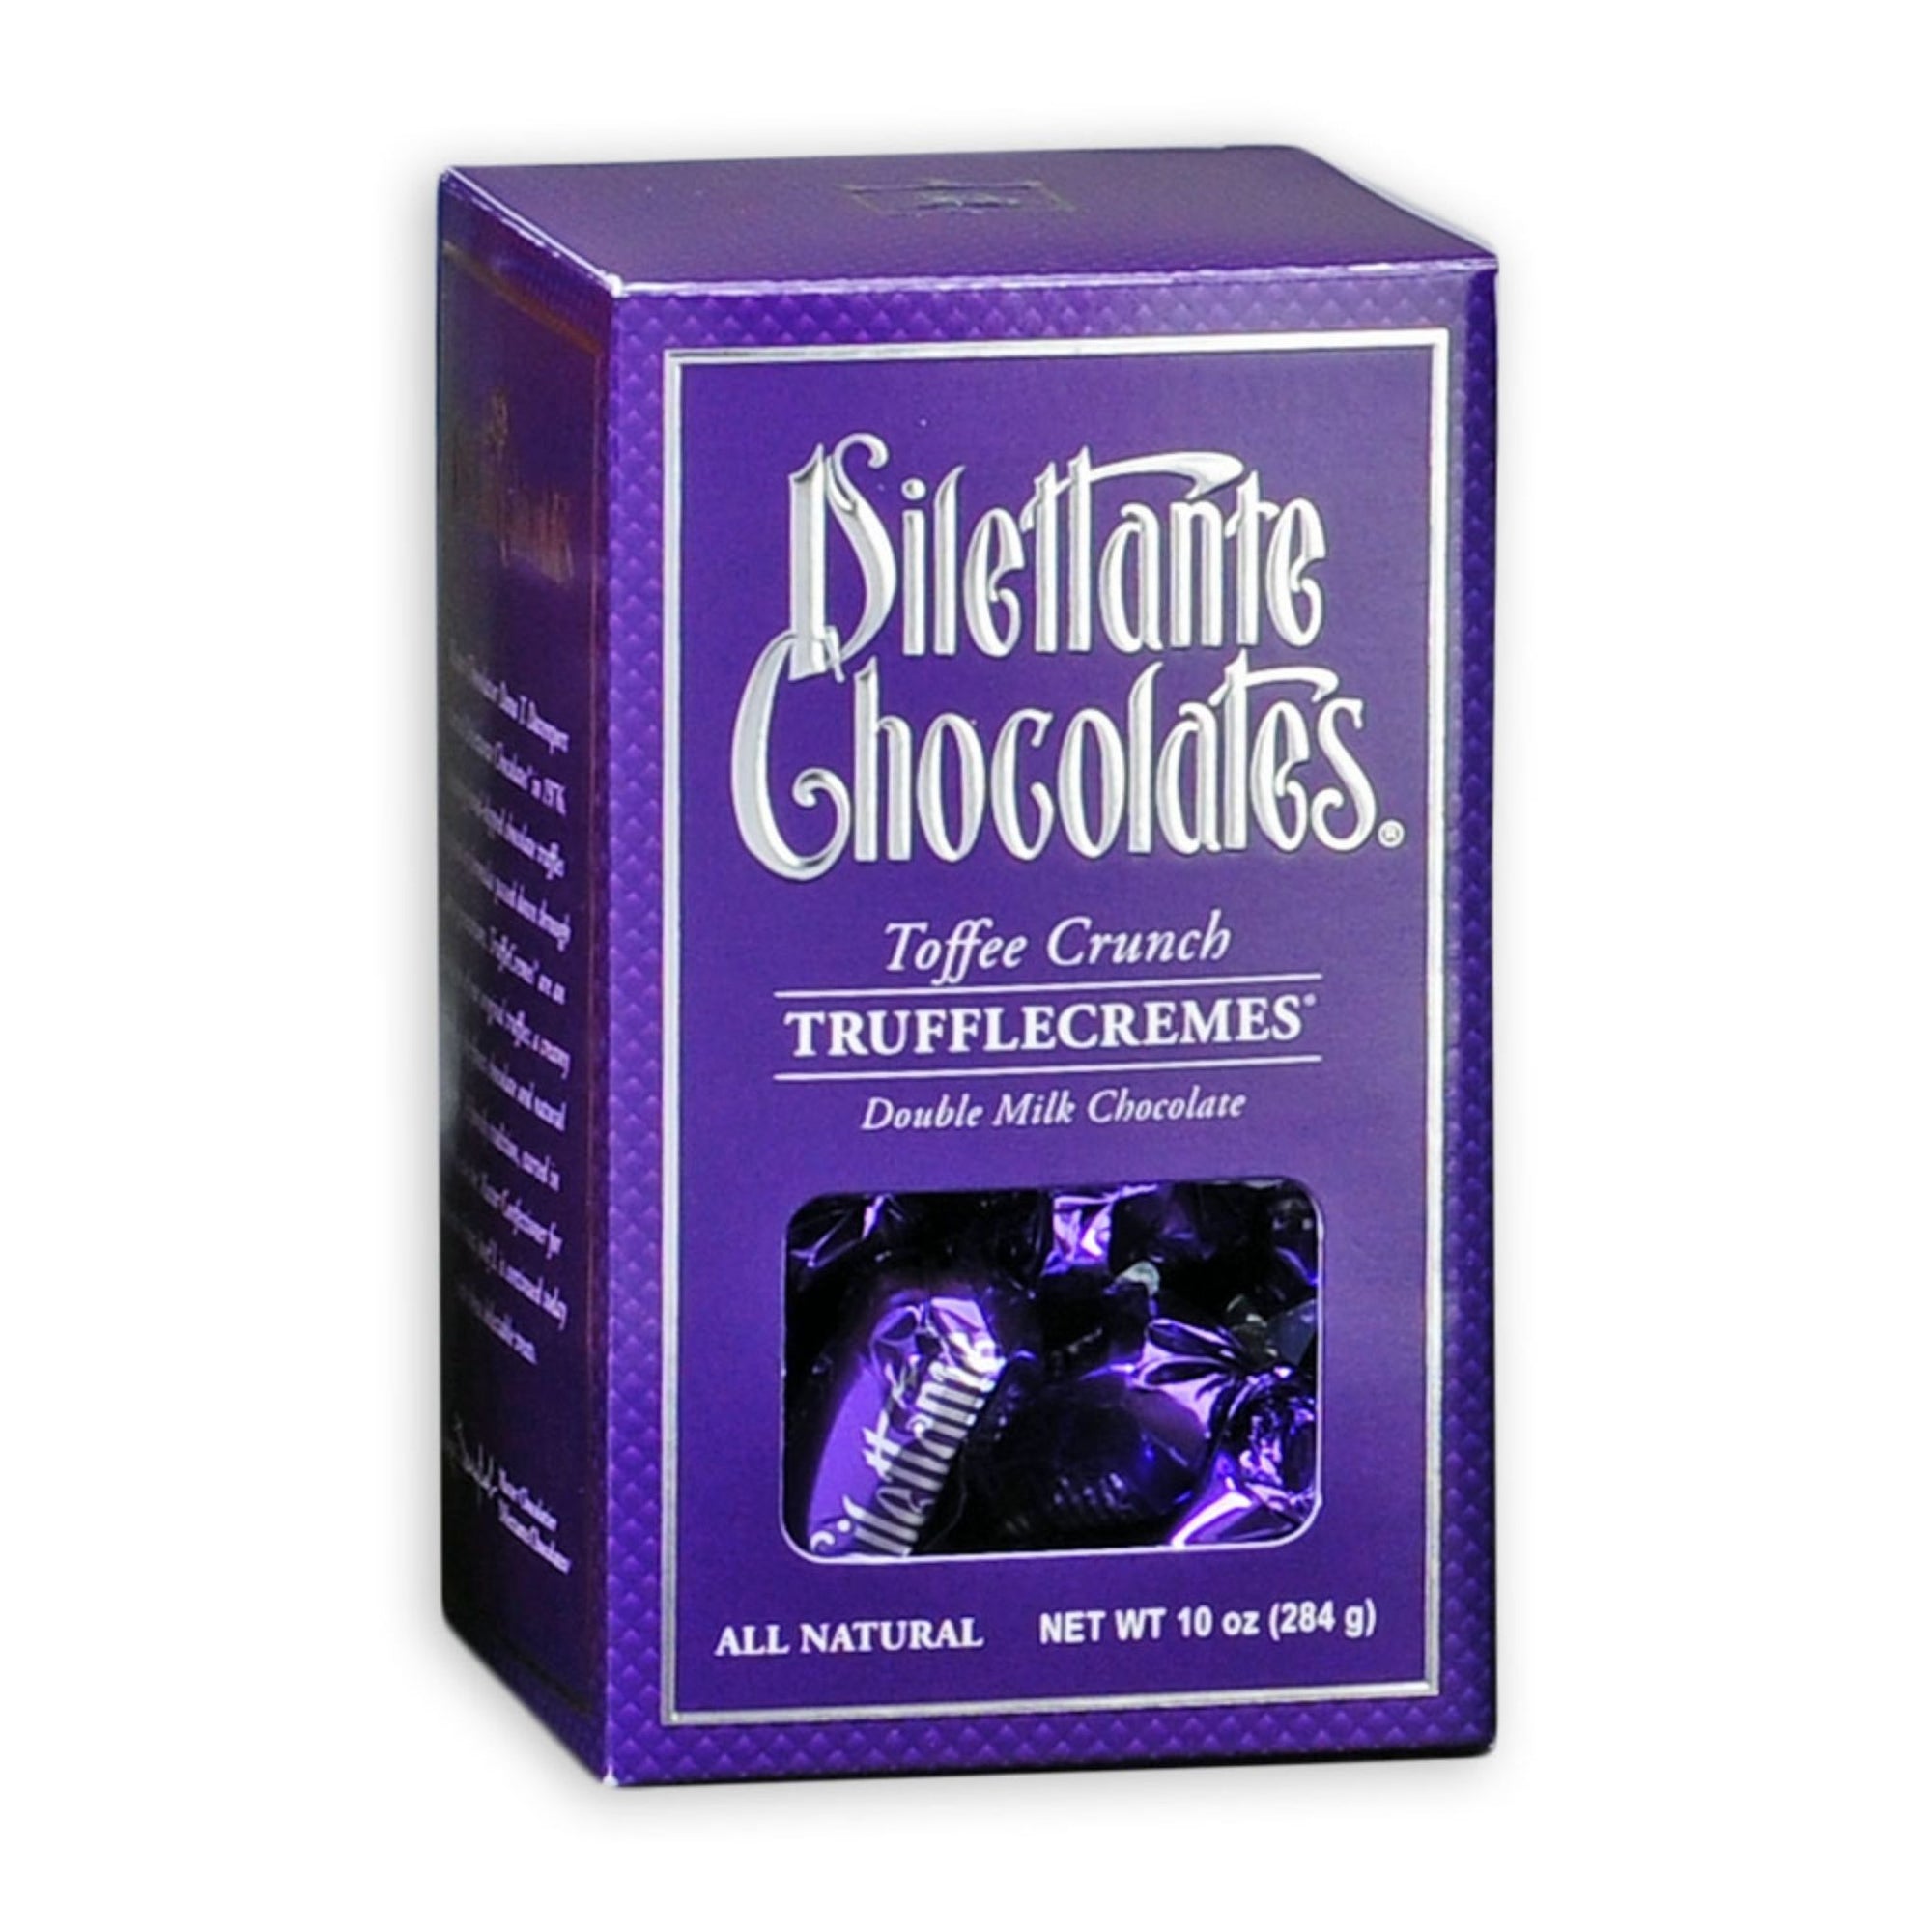 Dilettante Chocolates Toffee Crunch TruffleCremes Coated in Double Milk Chocolate